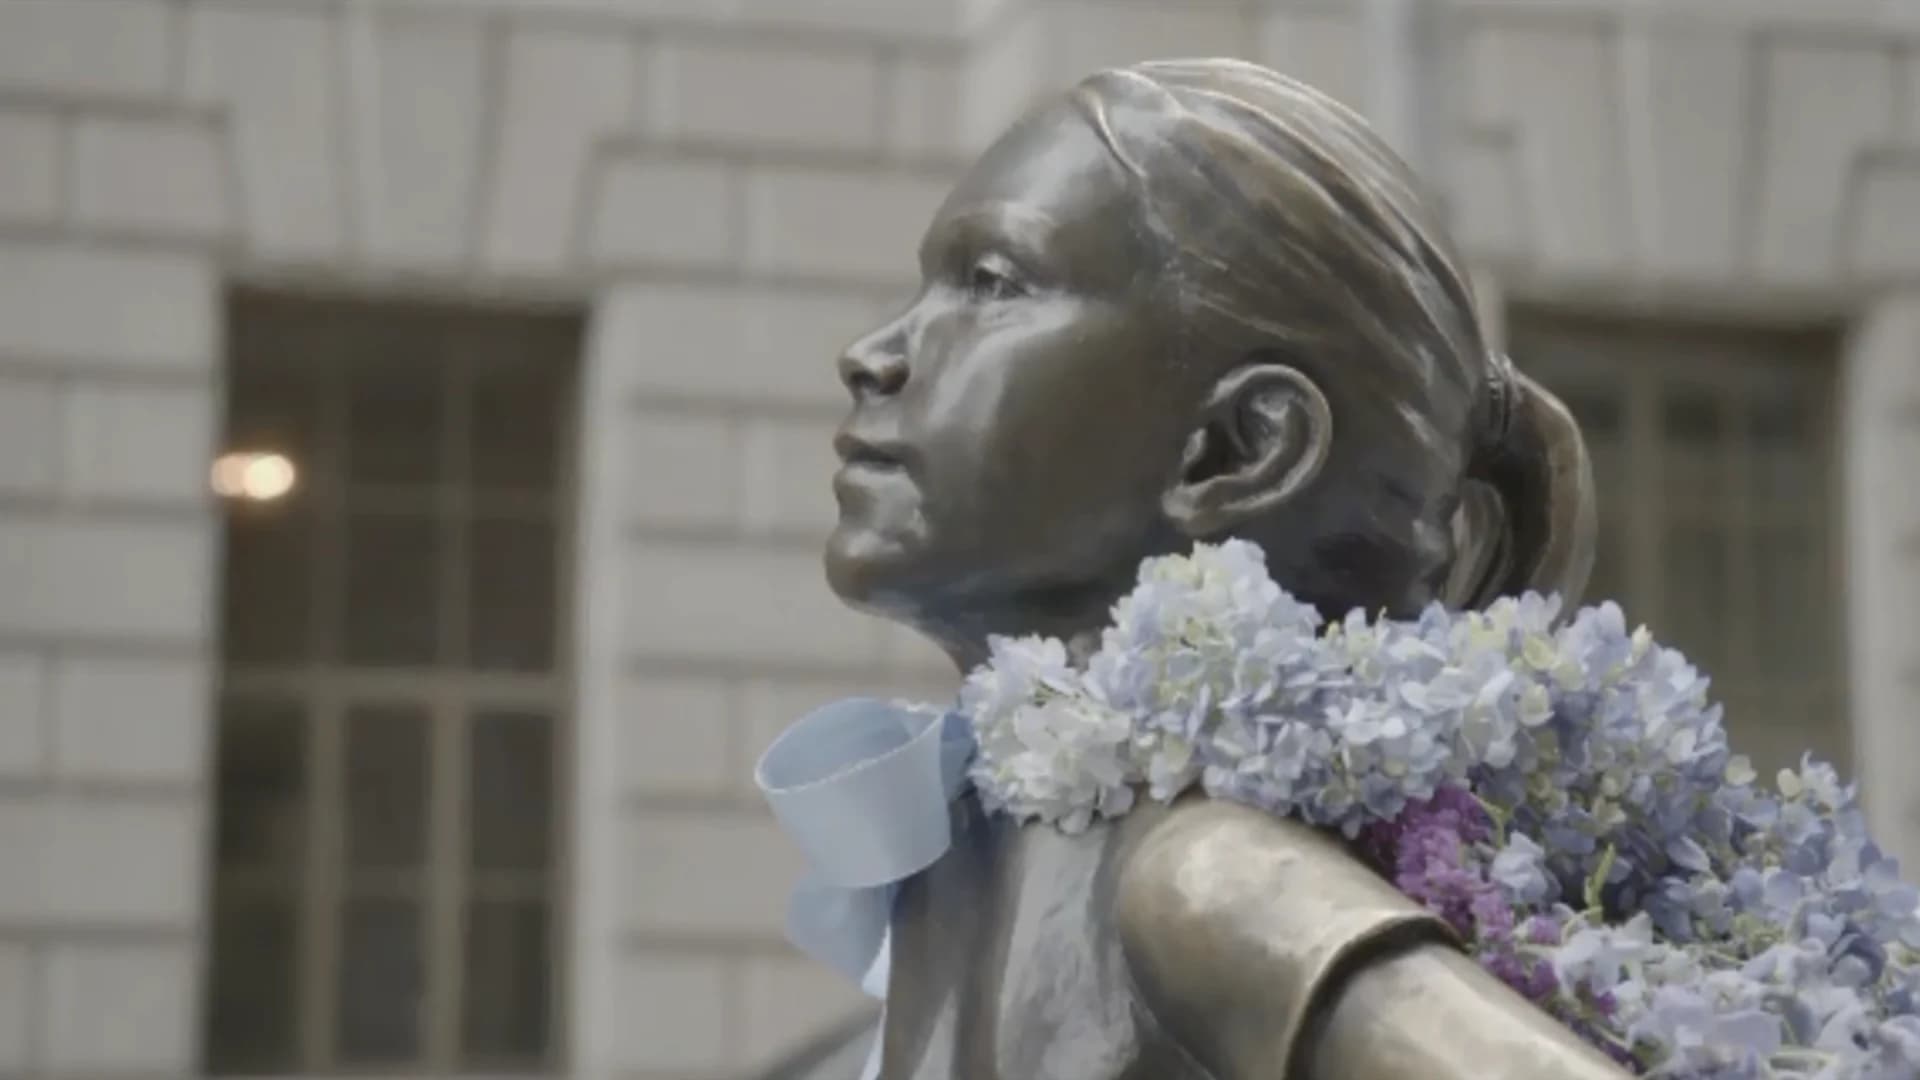 #N12BK: ‘Fearless Girl’ statue moving